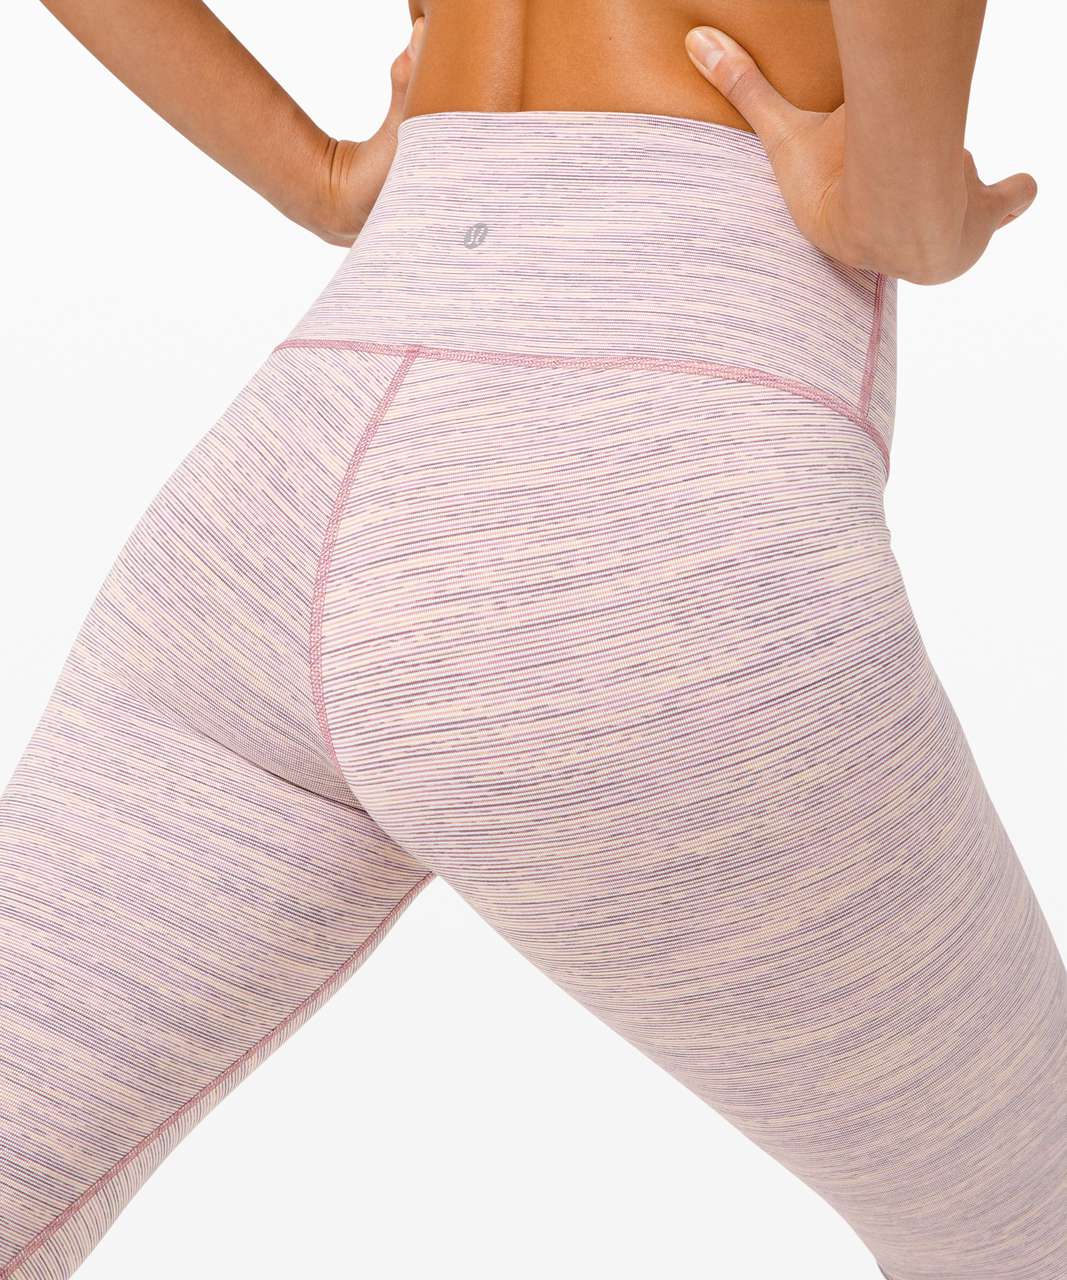 Lululemon Wunder Under High-Rise Tight 28" - Wee Are From Space Pink Bliss Vintage Mauve